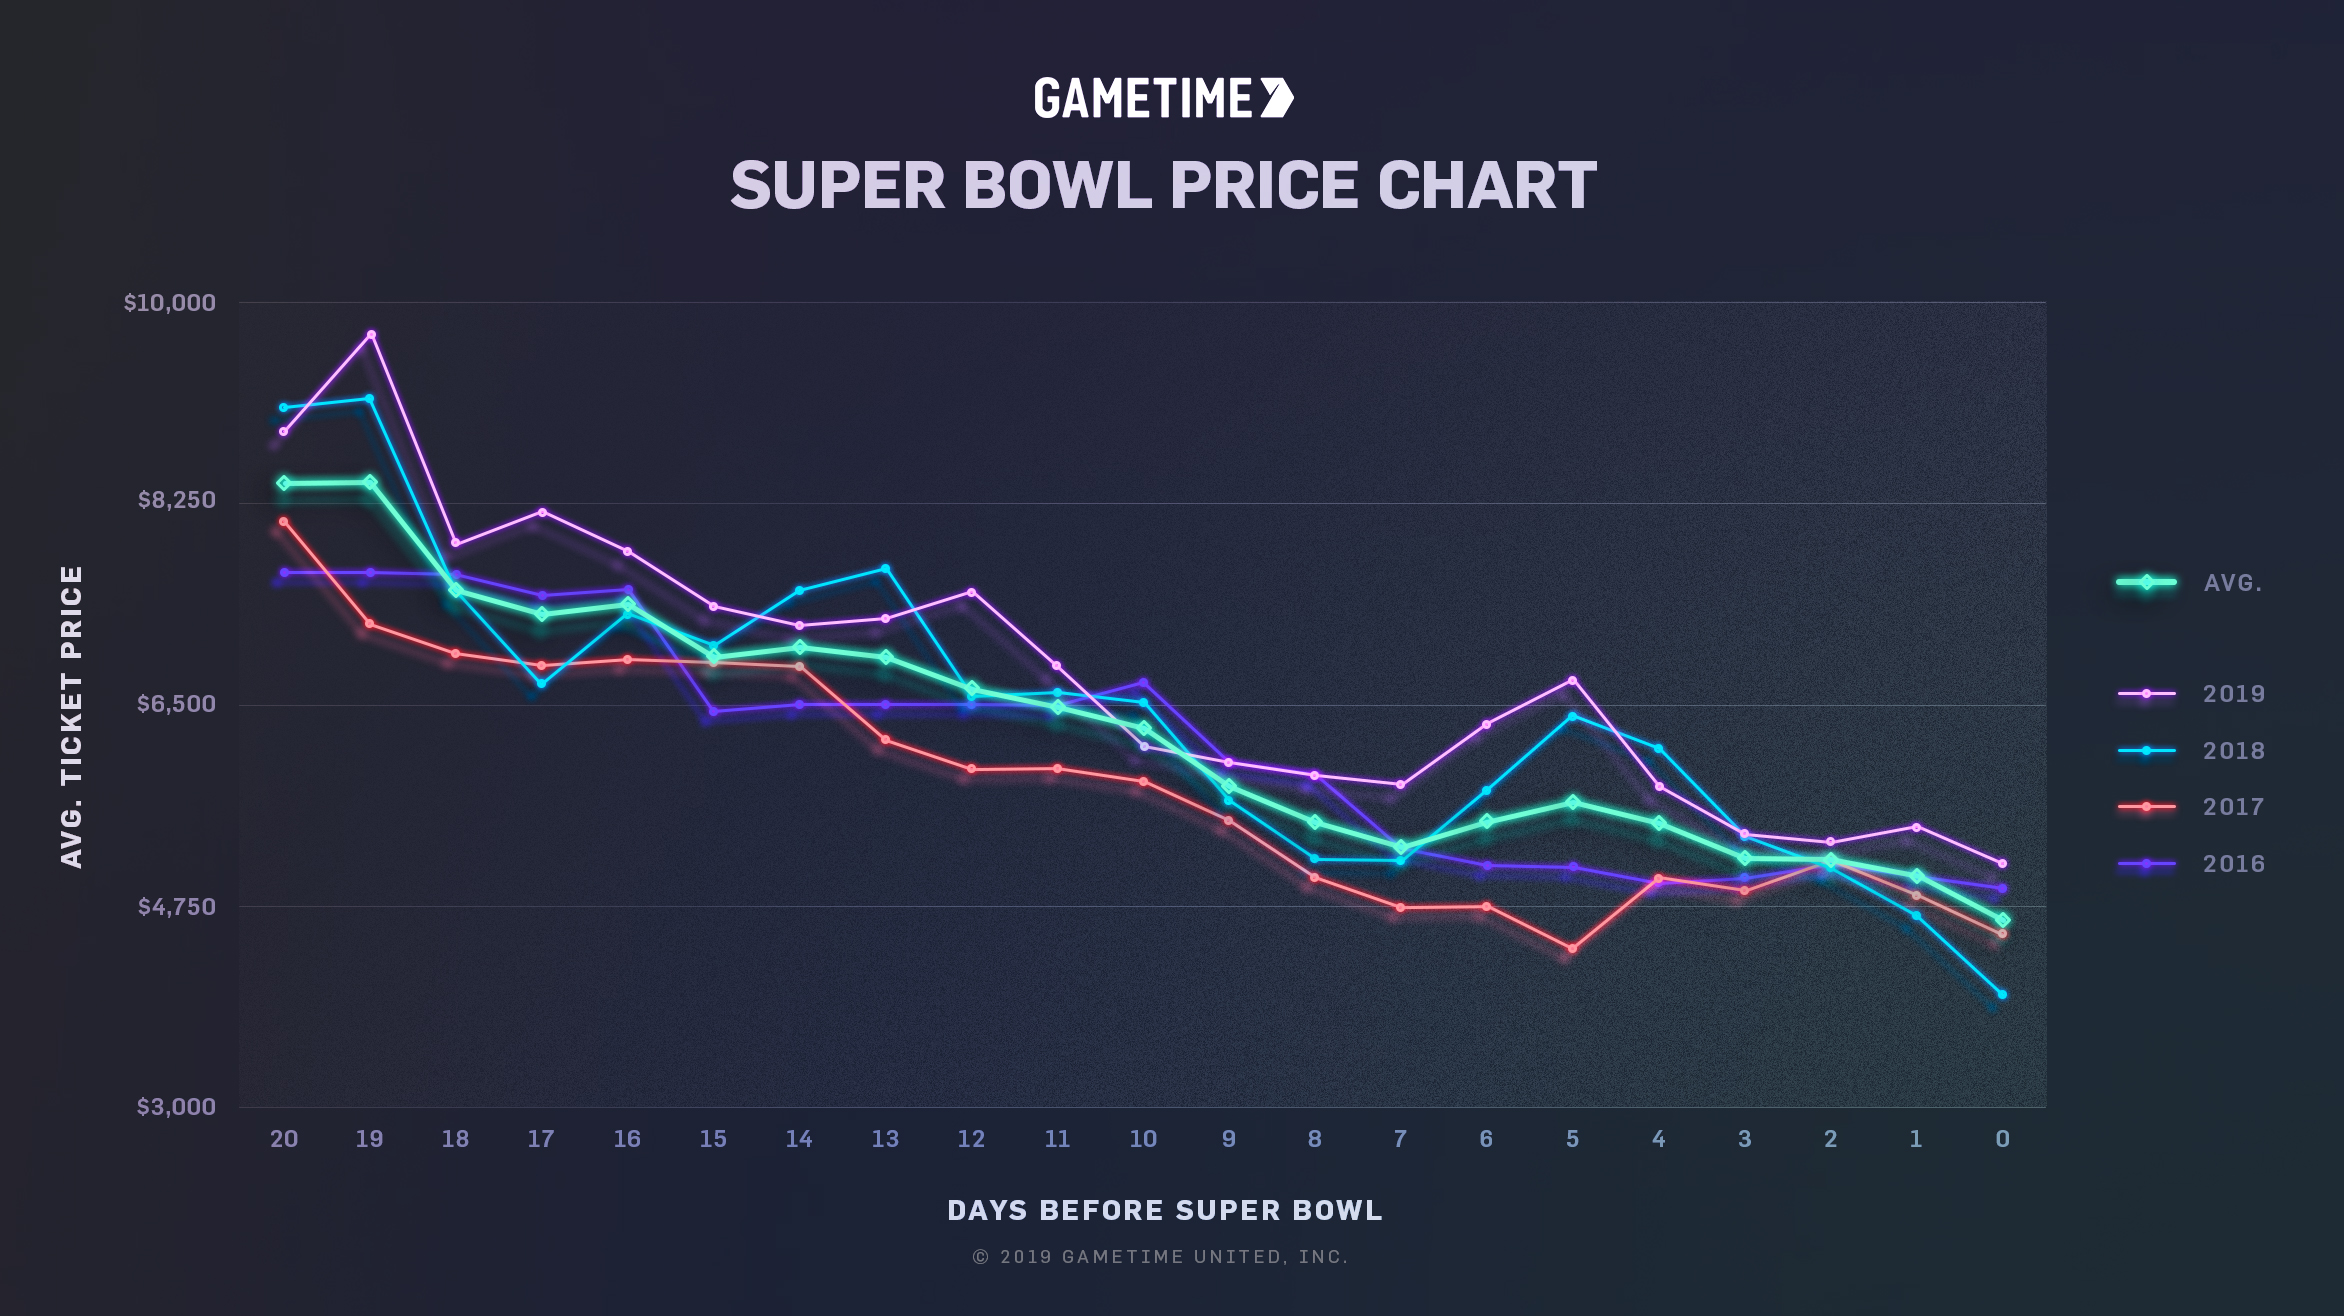 super bowl tickets 2022 cheapest